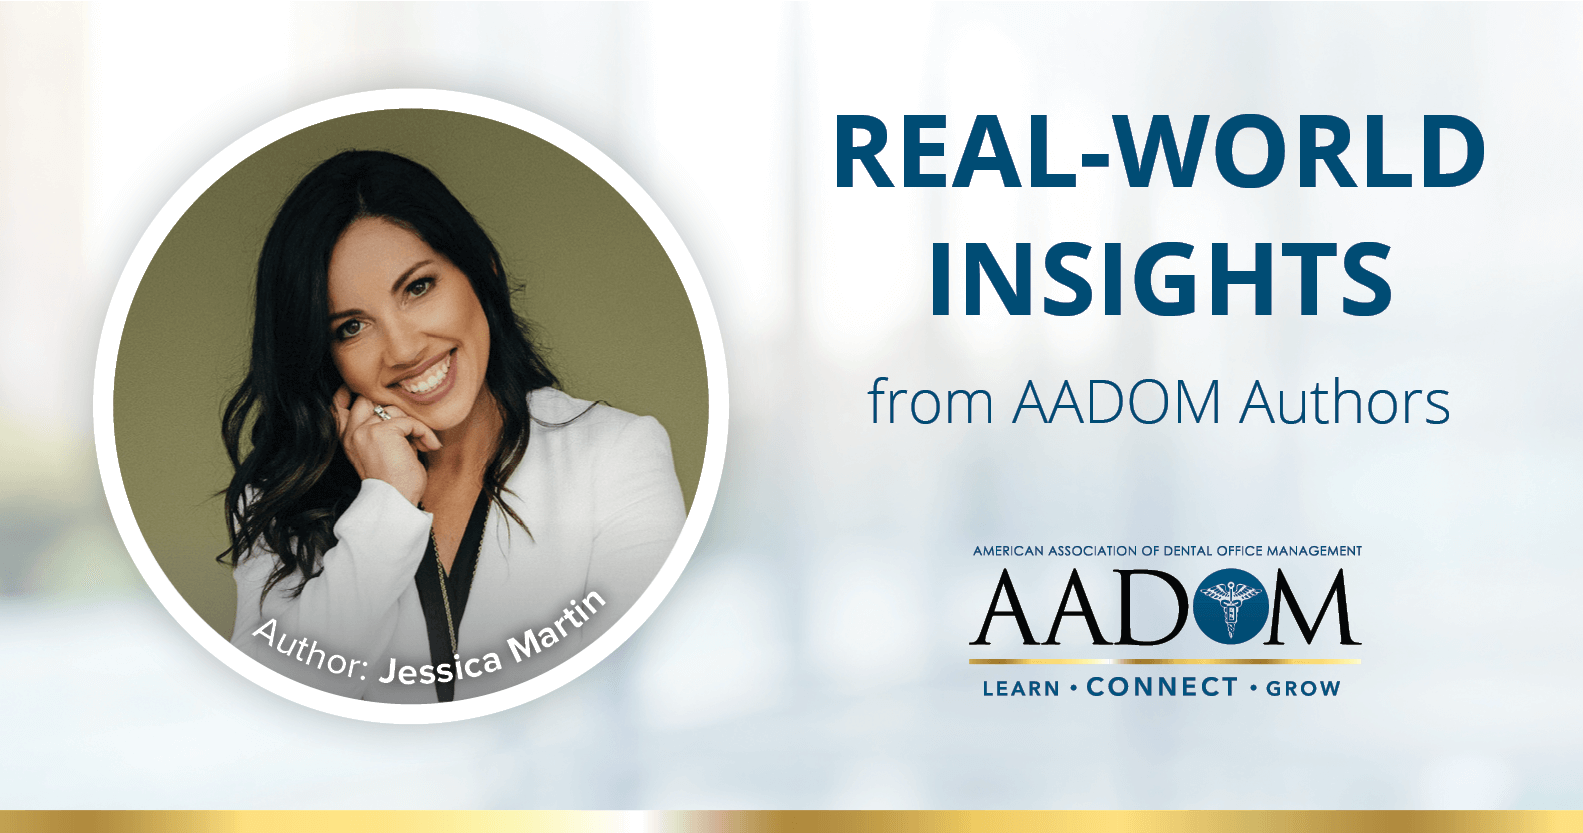 Real World Insights from AADOM Authors - Jessica Martin